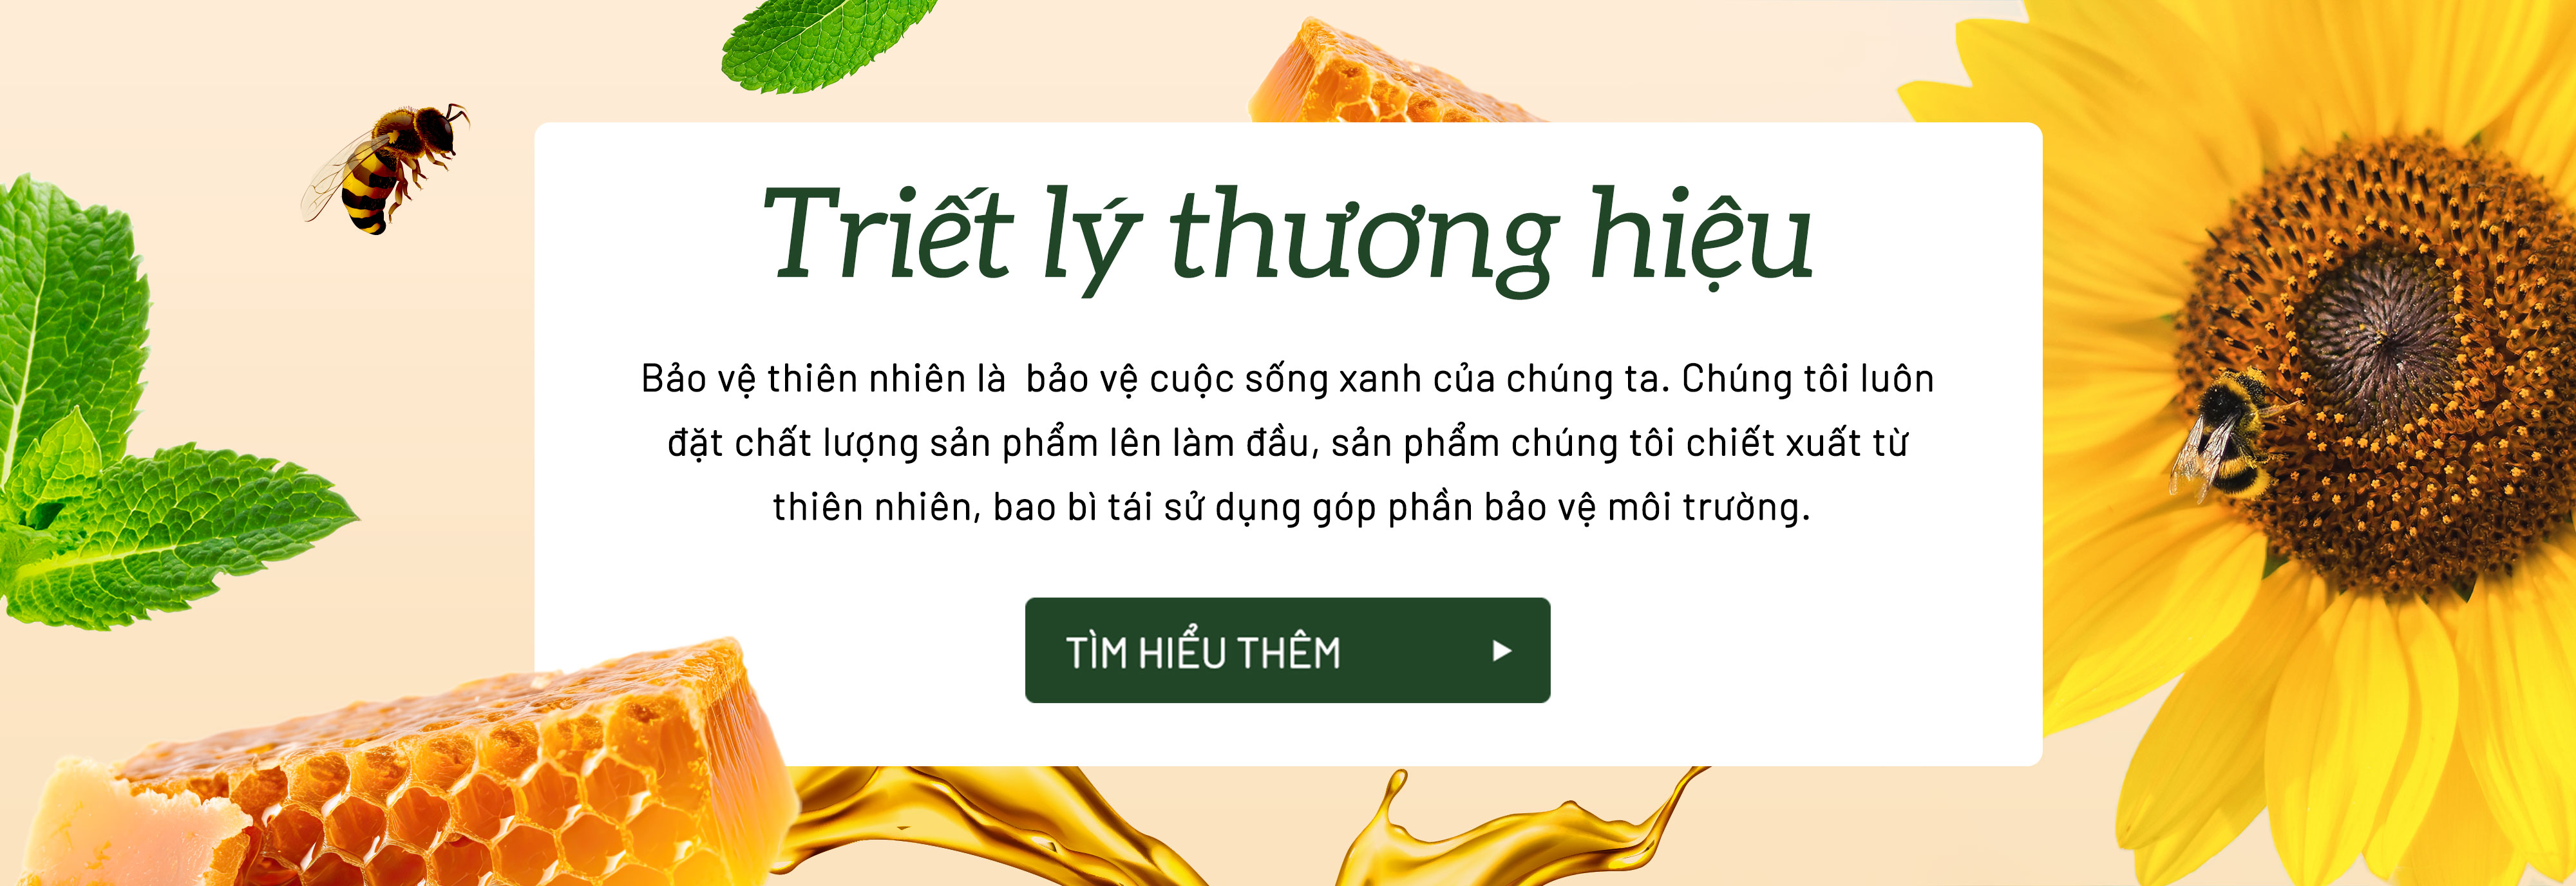 Triet ly thuong hieu